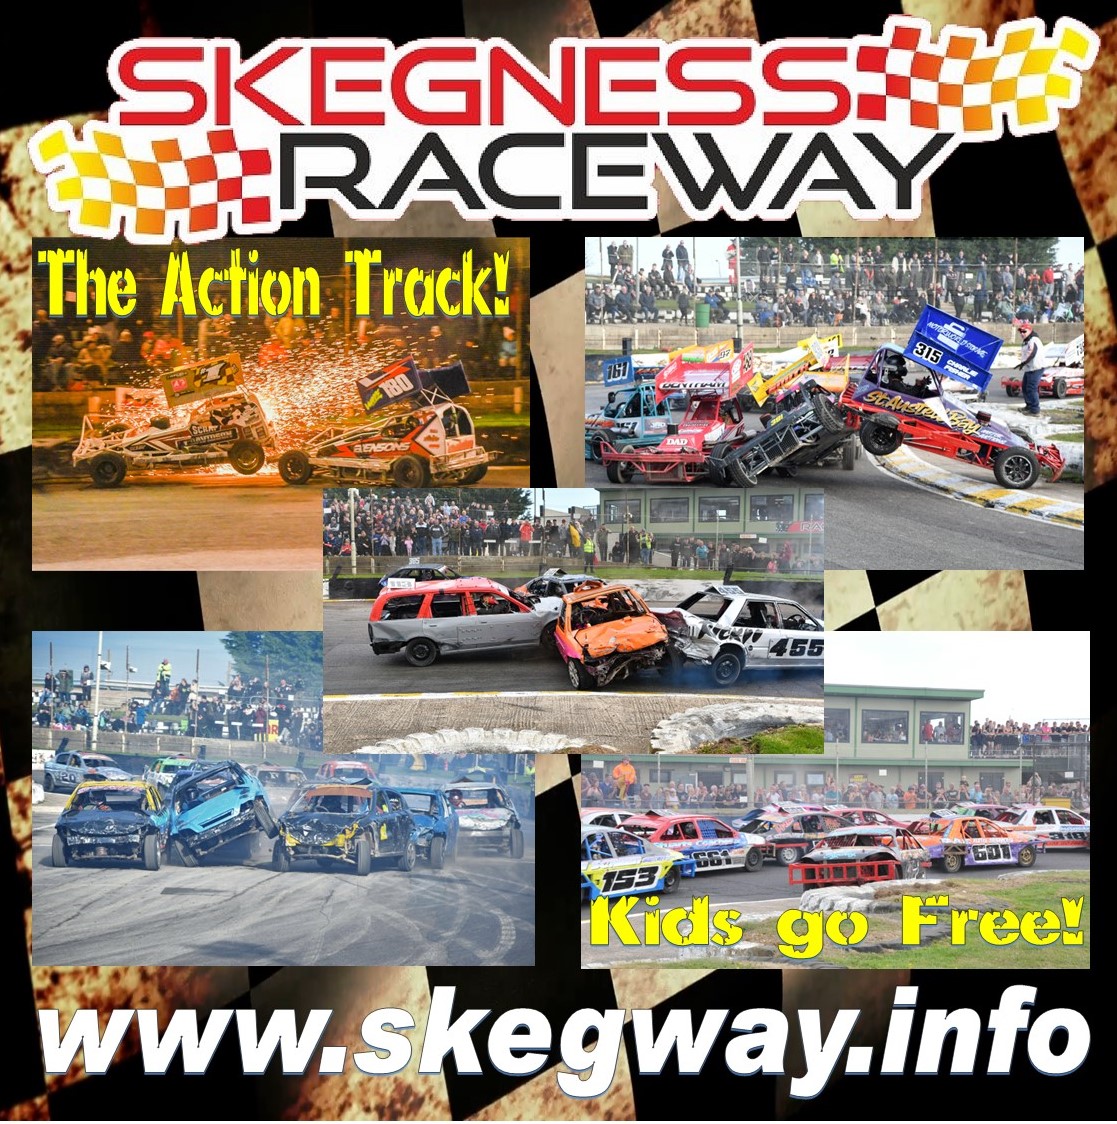 Skeg Vegas Entertainment! Just visit skegway.info for full event guide Our next events are Sun 5th 1pm & Mon 6th May 1pm Stock Car & Banger Racing plus lots more! Advance Tickets on the website plus lots of info on the raceway Great Family Entertainment Kids Go Free